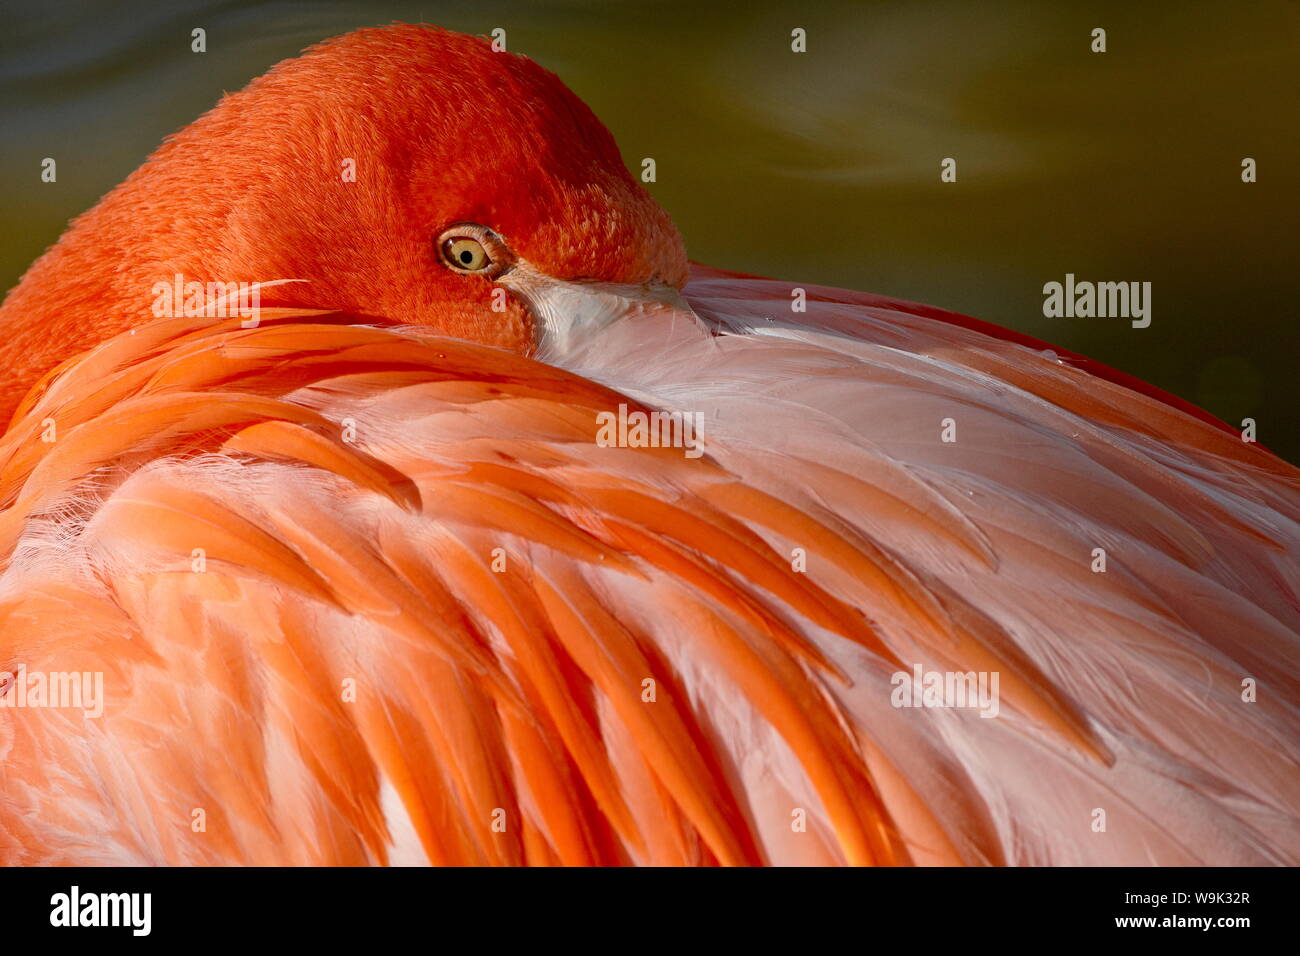 Caribbean flamingo (Phoenicopterus ruber ruber) with beak nestled in the feathers of its back, Rio Grande Zoo, Albuquerque Biological Park, USA Stock Photo